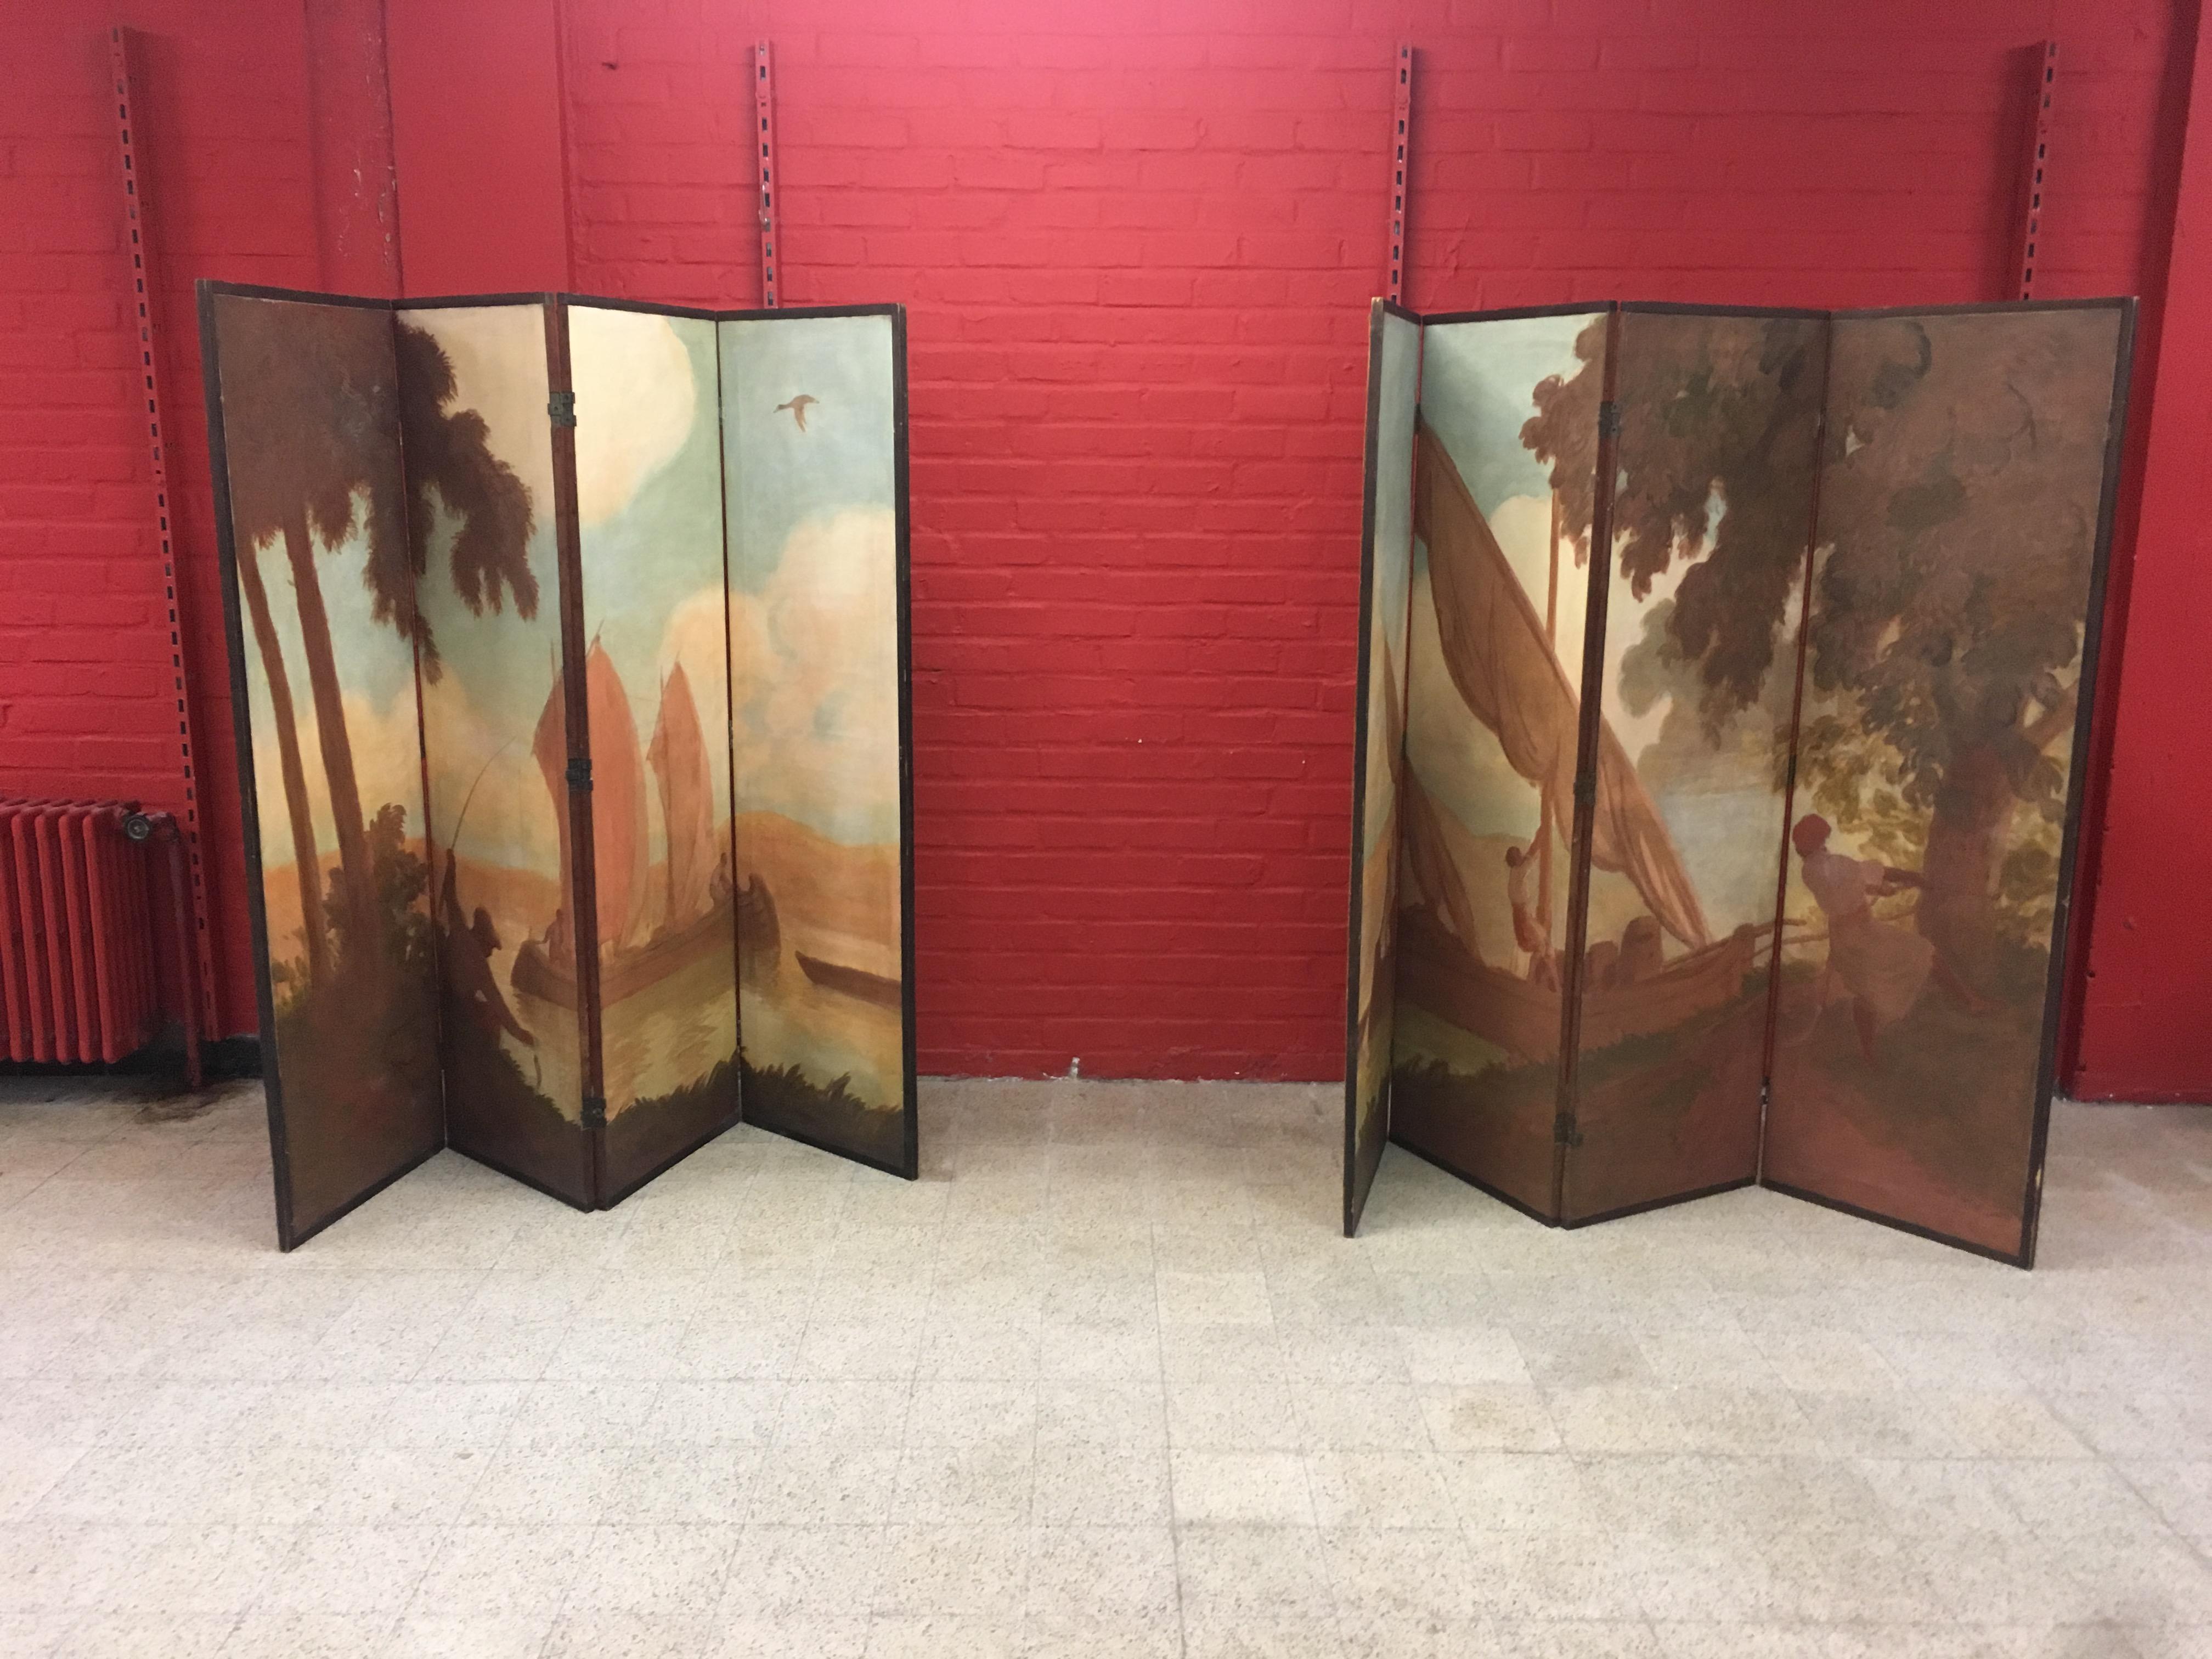 Rare folding screen period 1900, composed of two elements with 4 panels in painted canvas.
Charming pastel colors,
maybe a decor on the Nile in Egypt at the end of the 20th century
Dimensions: 170 x 416 x 2 cm
2 panels in 4 parts each (170 x 52